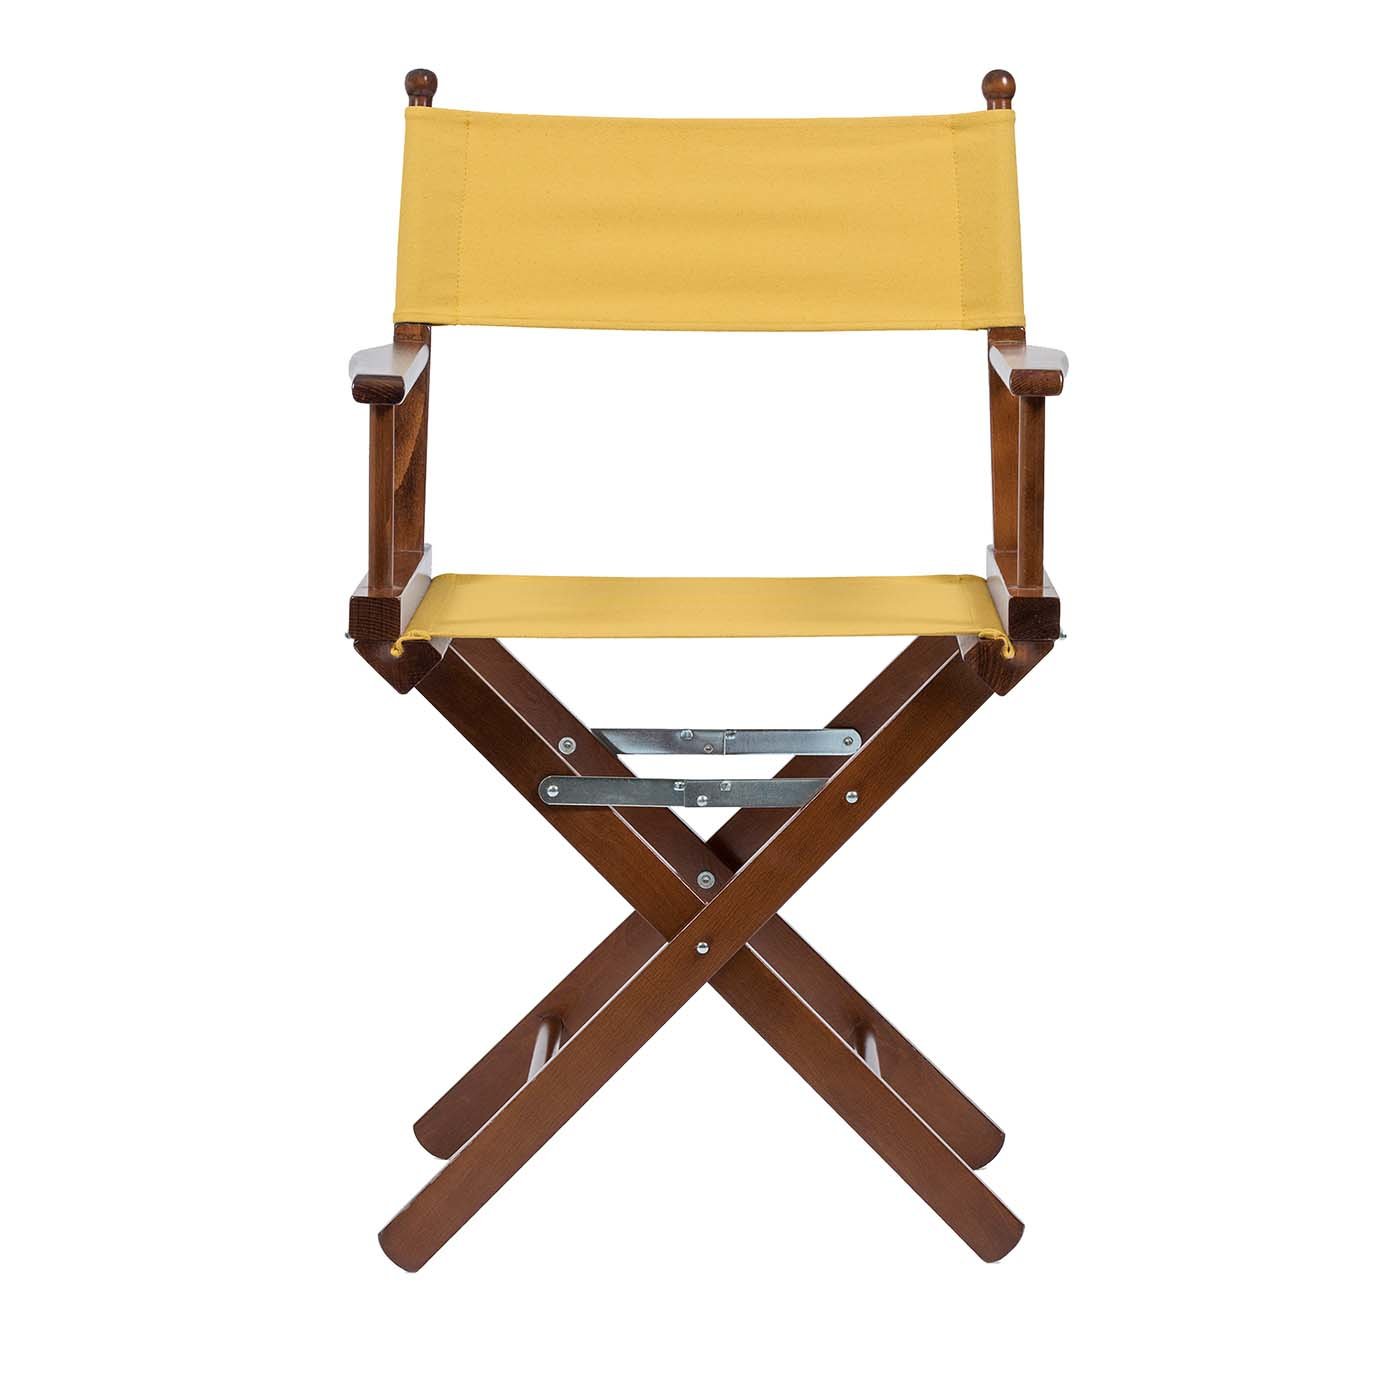 Directors Chairs Director's Chair in Mustard Yellow Telami - Artemest